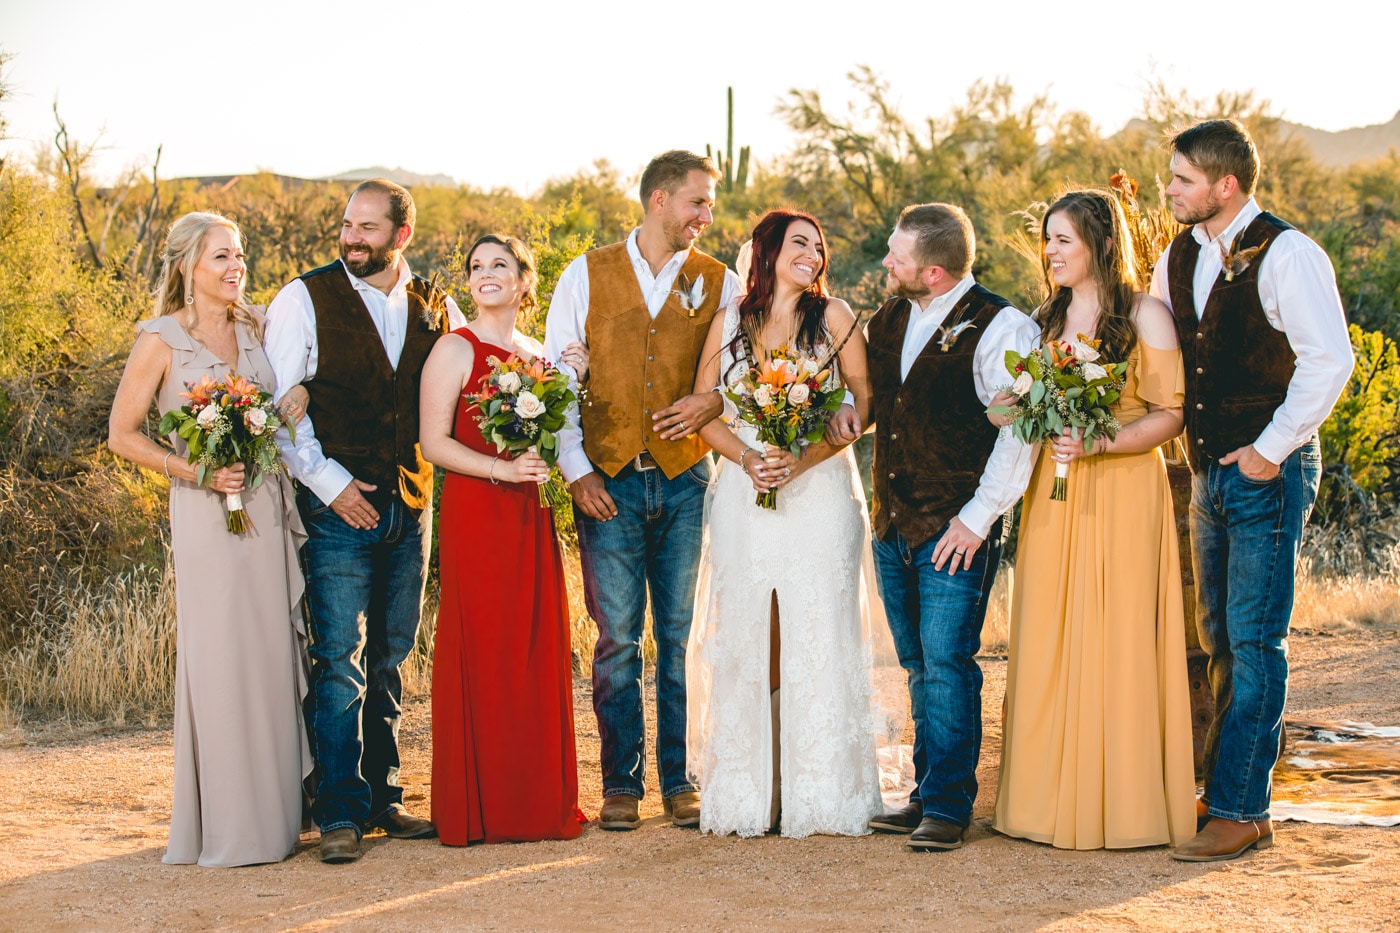 Bride and groom with wedding party in desert